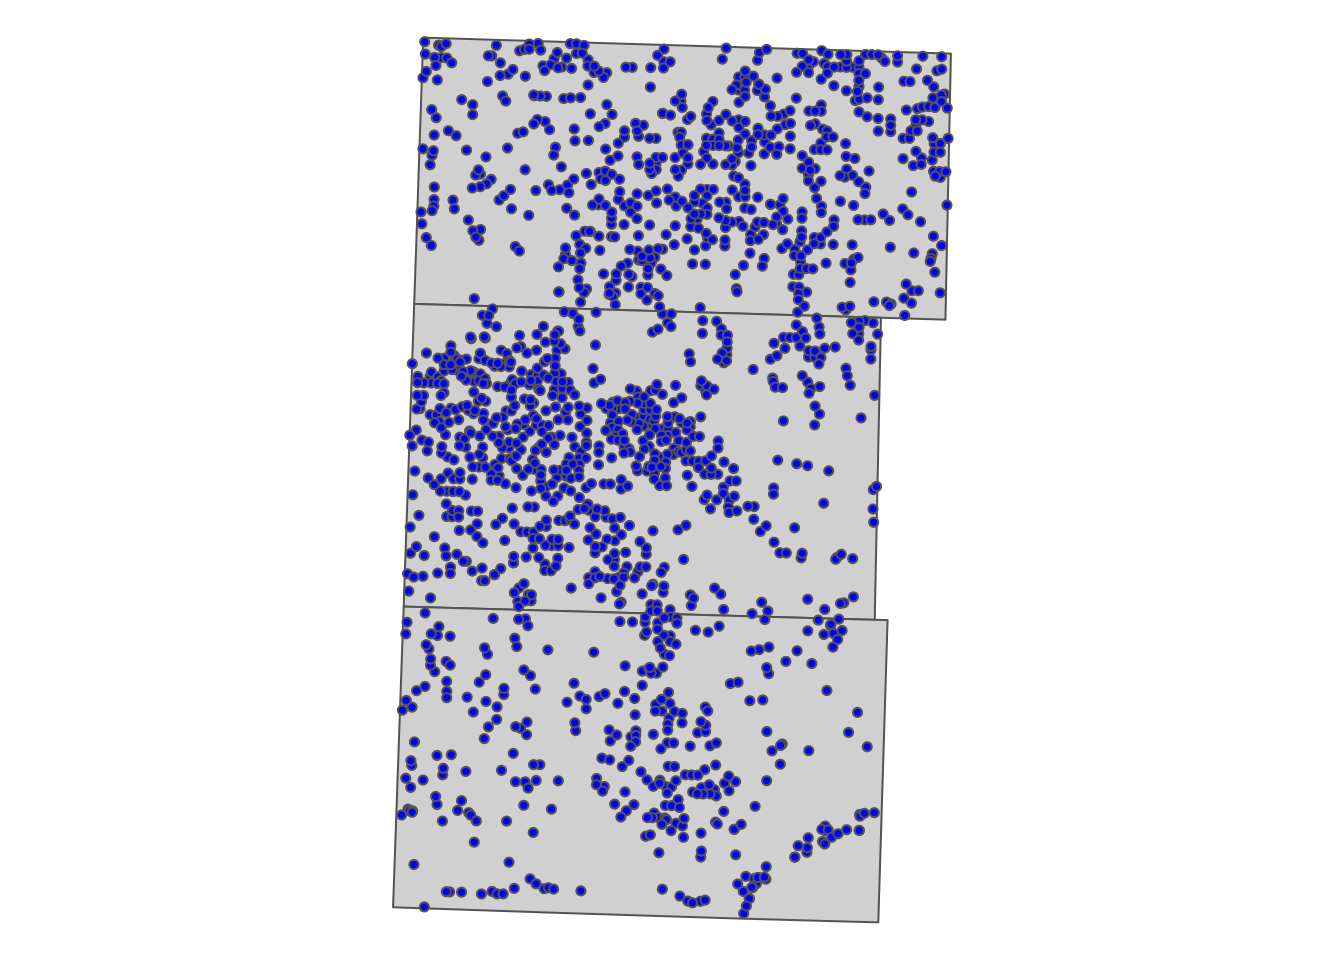 Spatial distribution of irrigation wells